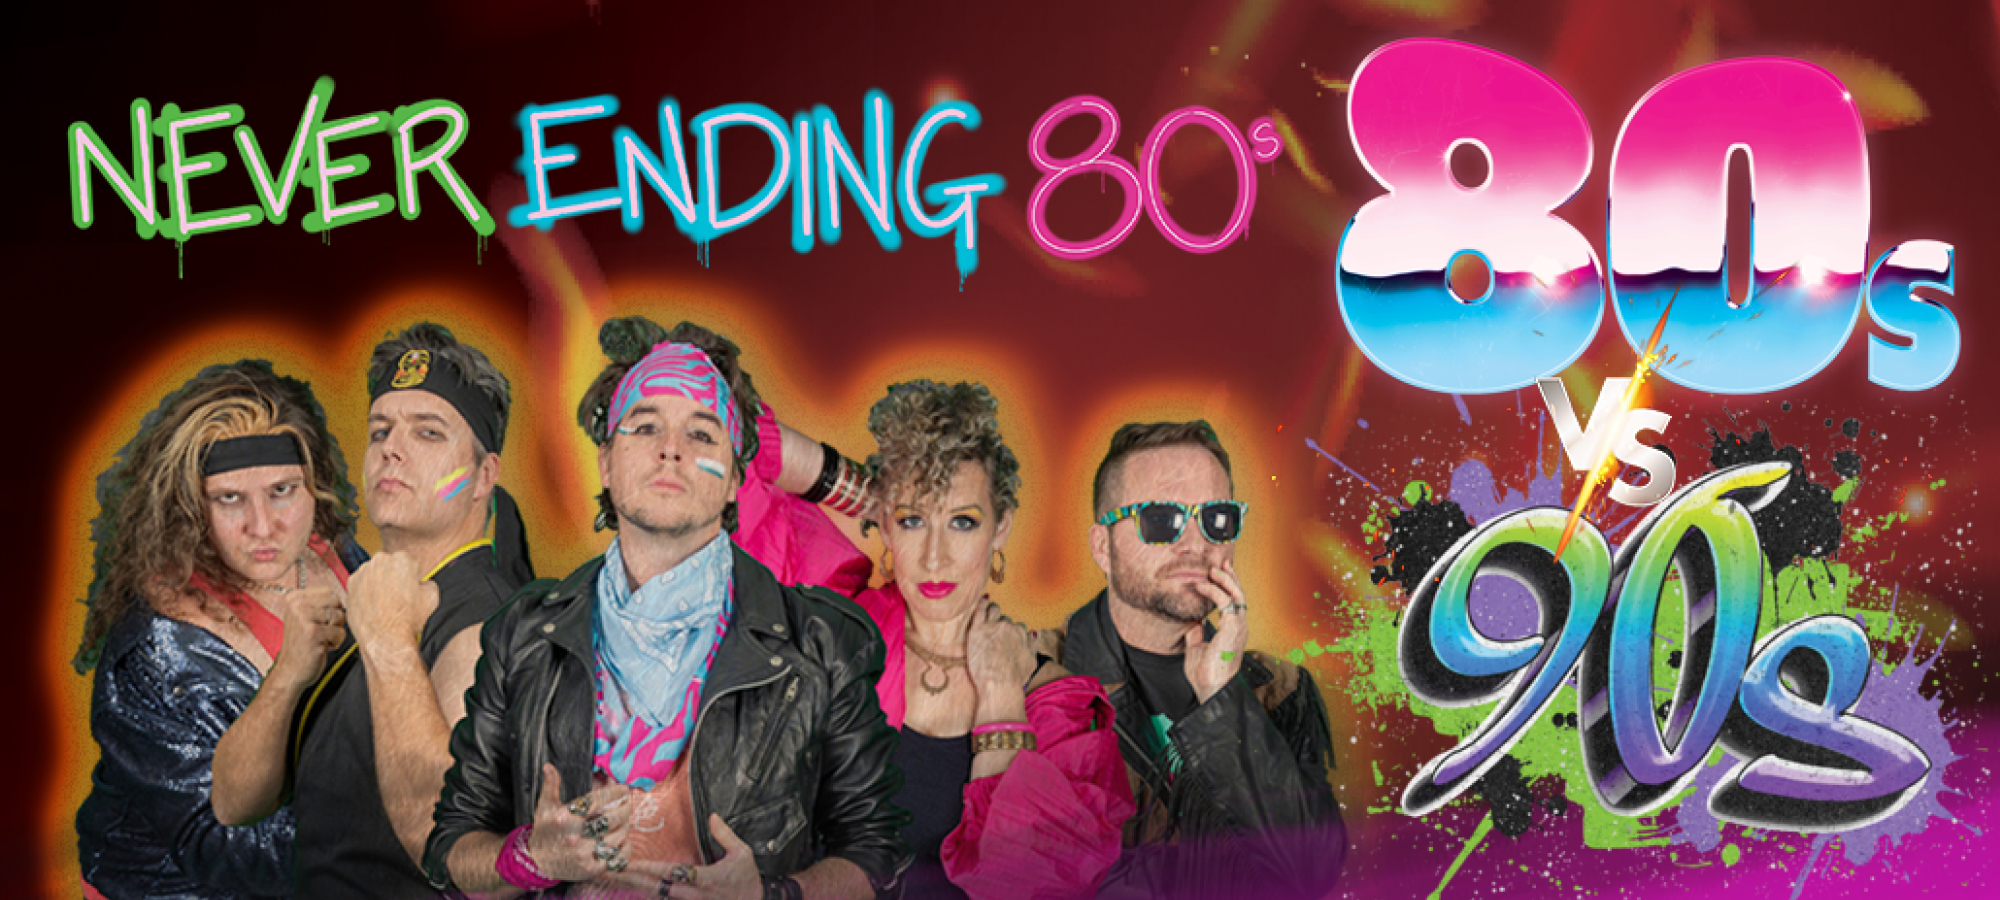 Never Ending 80s – 80’s V 90’s The Battle of the Decades